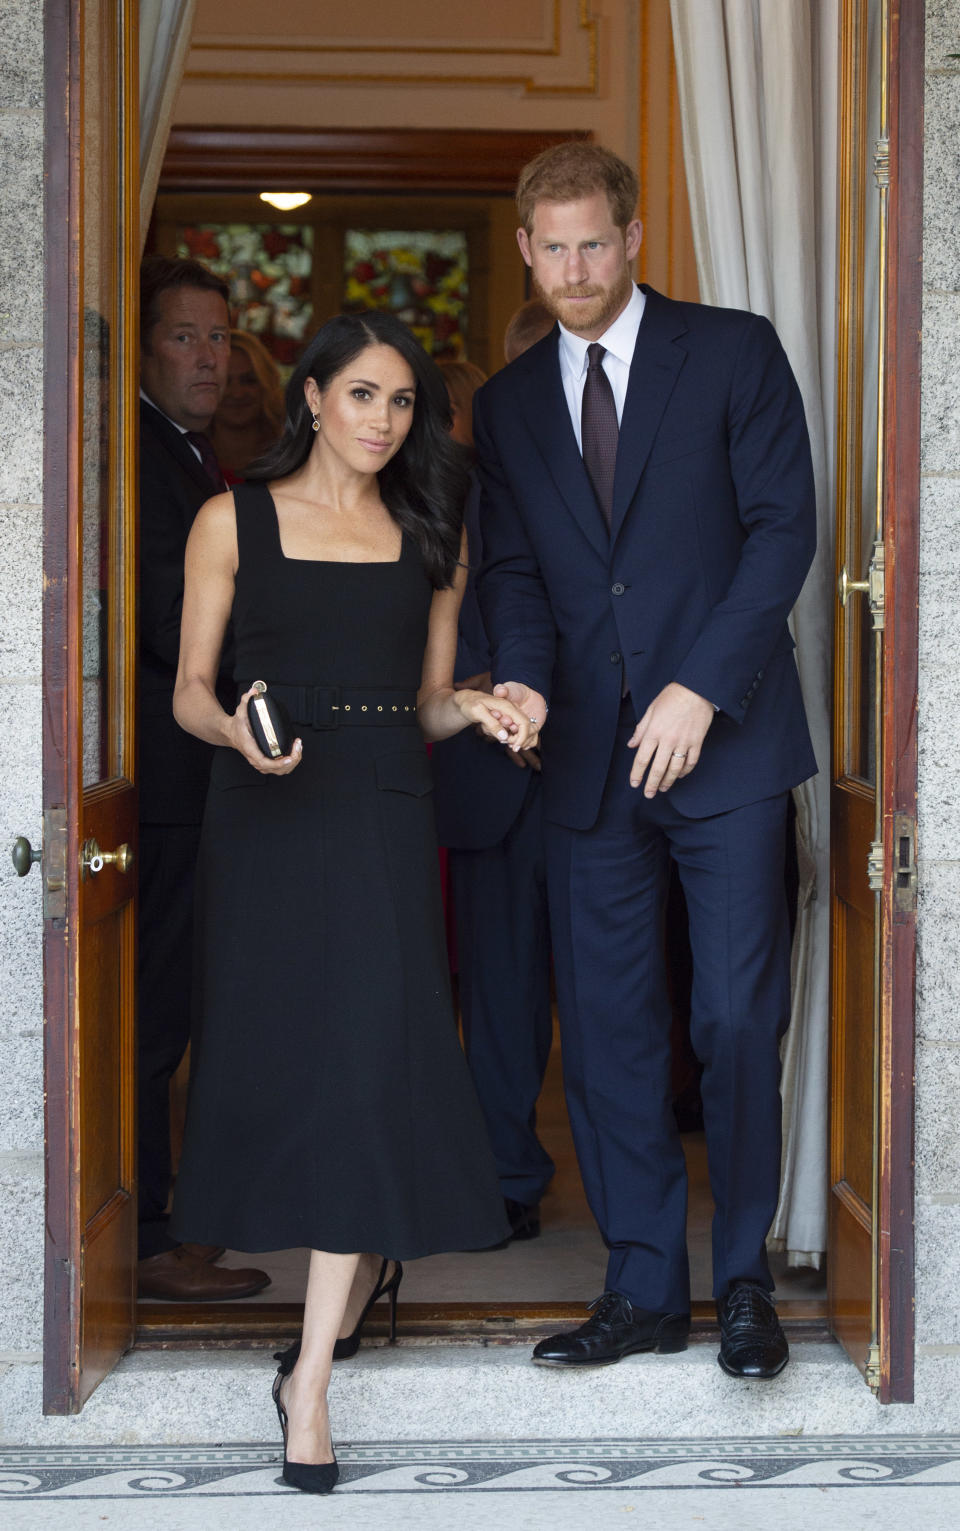 DUBLIN, IRELAND - JULY 10: Prince Harry, Duke of Sussex and Meghan, Duchess of Sussex attend a reception at Glencairn, the residence of Robin Barnett, the British Ambassador to Ireland during day one of their visit to Ireland on July 10, 2018 in Dublin, Ireland. (Photo by Geoff Pugh - WPA Pool/Getty Images)